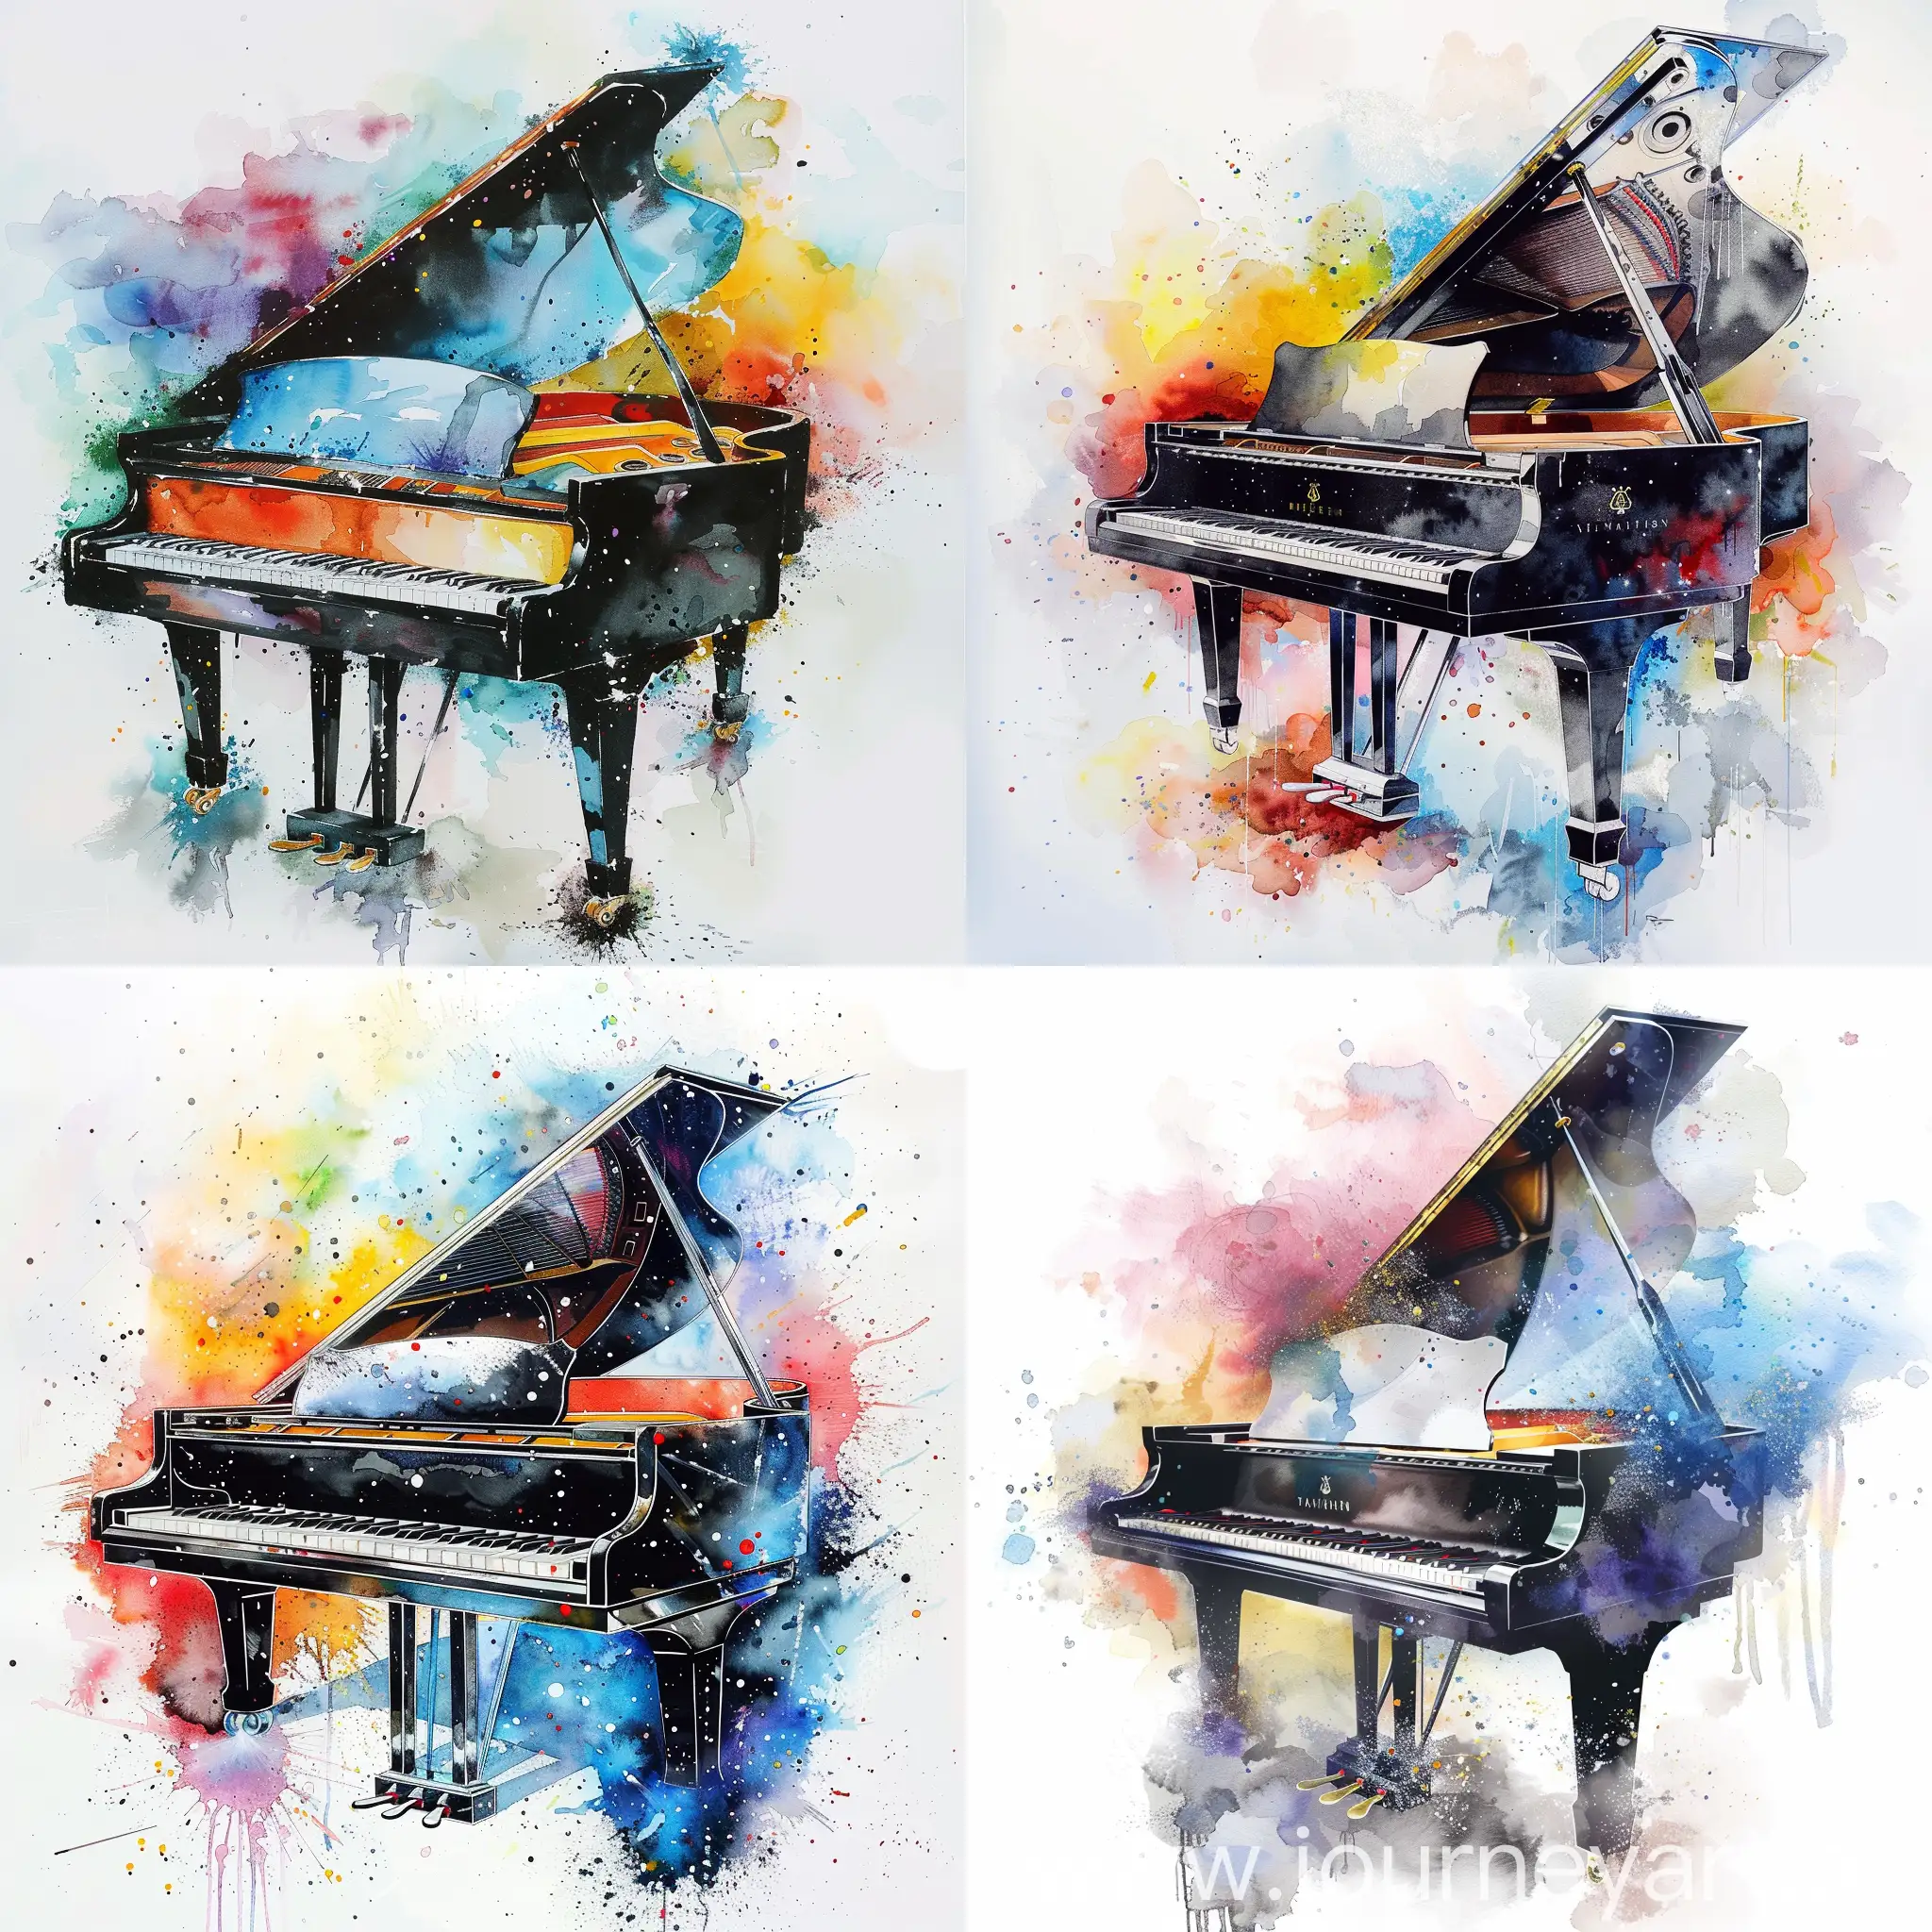 Watercolour-impressionism-abstract multu-coloured clouds-white background-baby grand piano in 3/4 positon with open lid-black, partly translusent and sparkling like a crystal